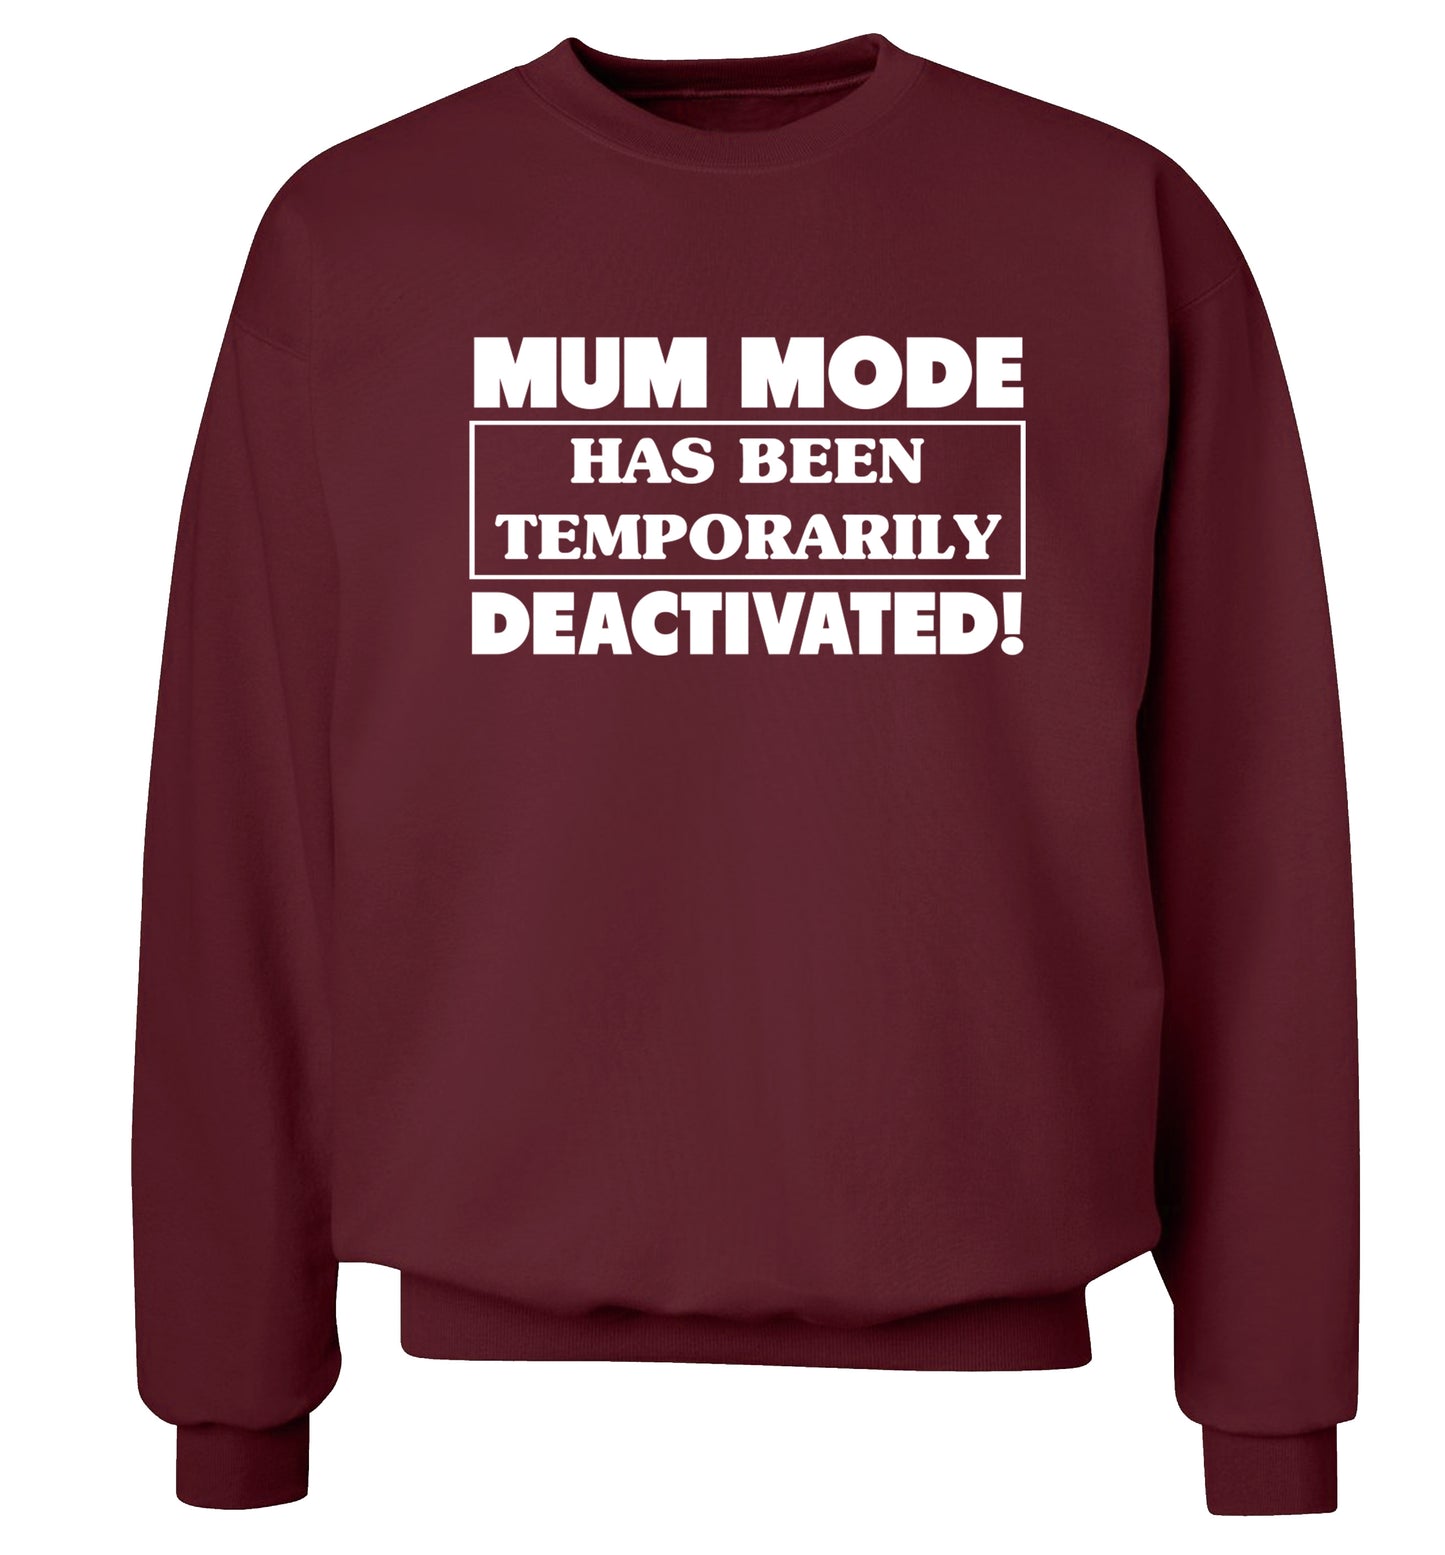 Mum mode has been temporarily deactivated! Adult's unisex maroon Sweater 2XL